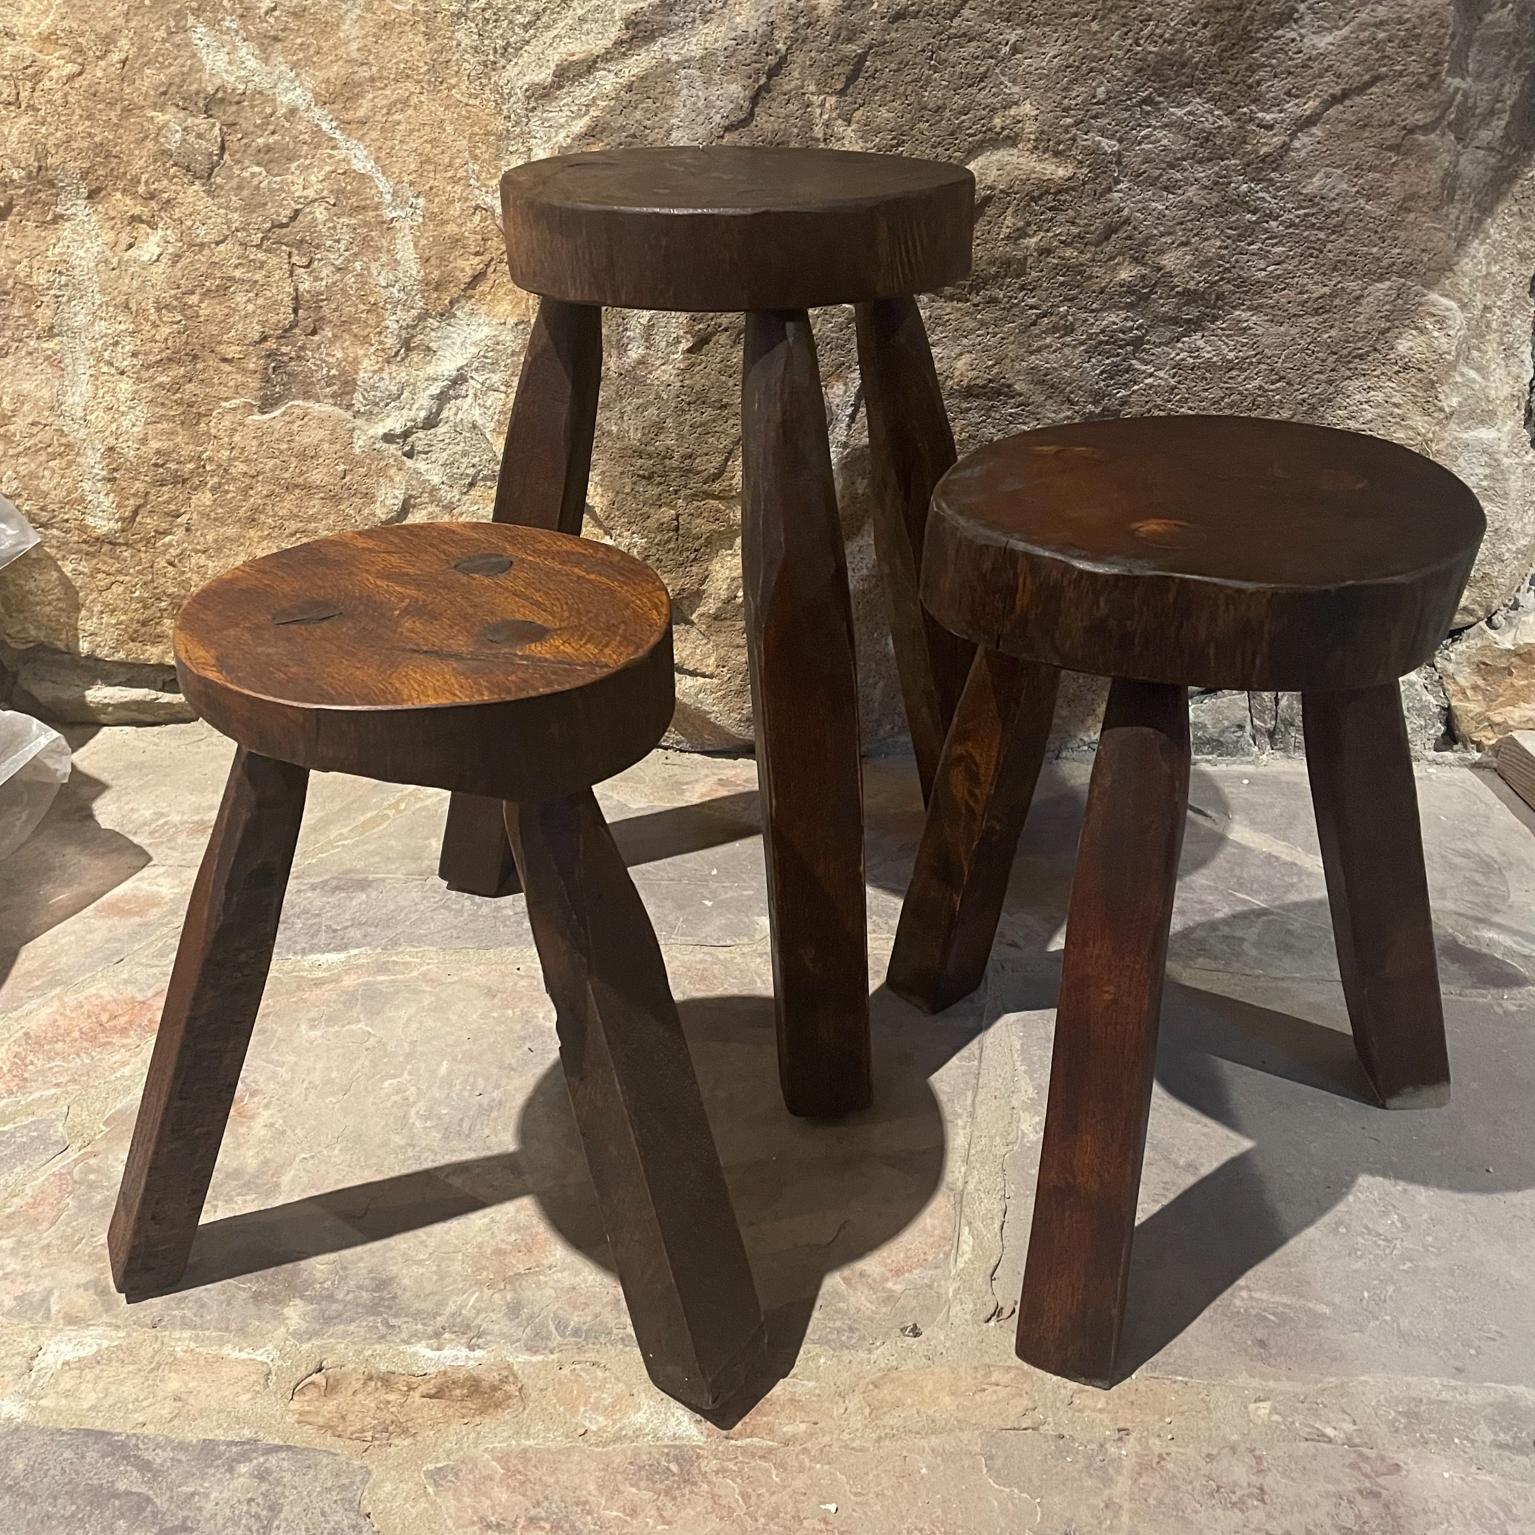 Vintage Set of 3 Rustic Stools
Carved Solid Wood Three-Legged in the style of Pierre Jeanneret
Unmarked. 
Three different sizes.
1) 18.5 H x 16 D 10 D top 2) 14.38 H 14 D x 9.5 D top 3) 13.63 H 13 D 8 D top
Original vintage preowned unrestored